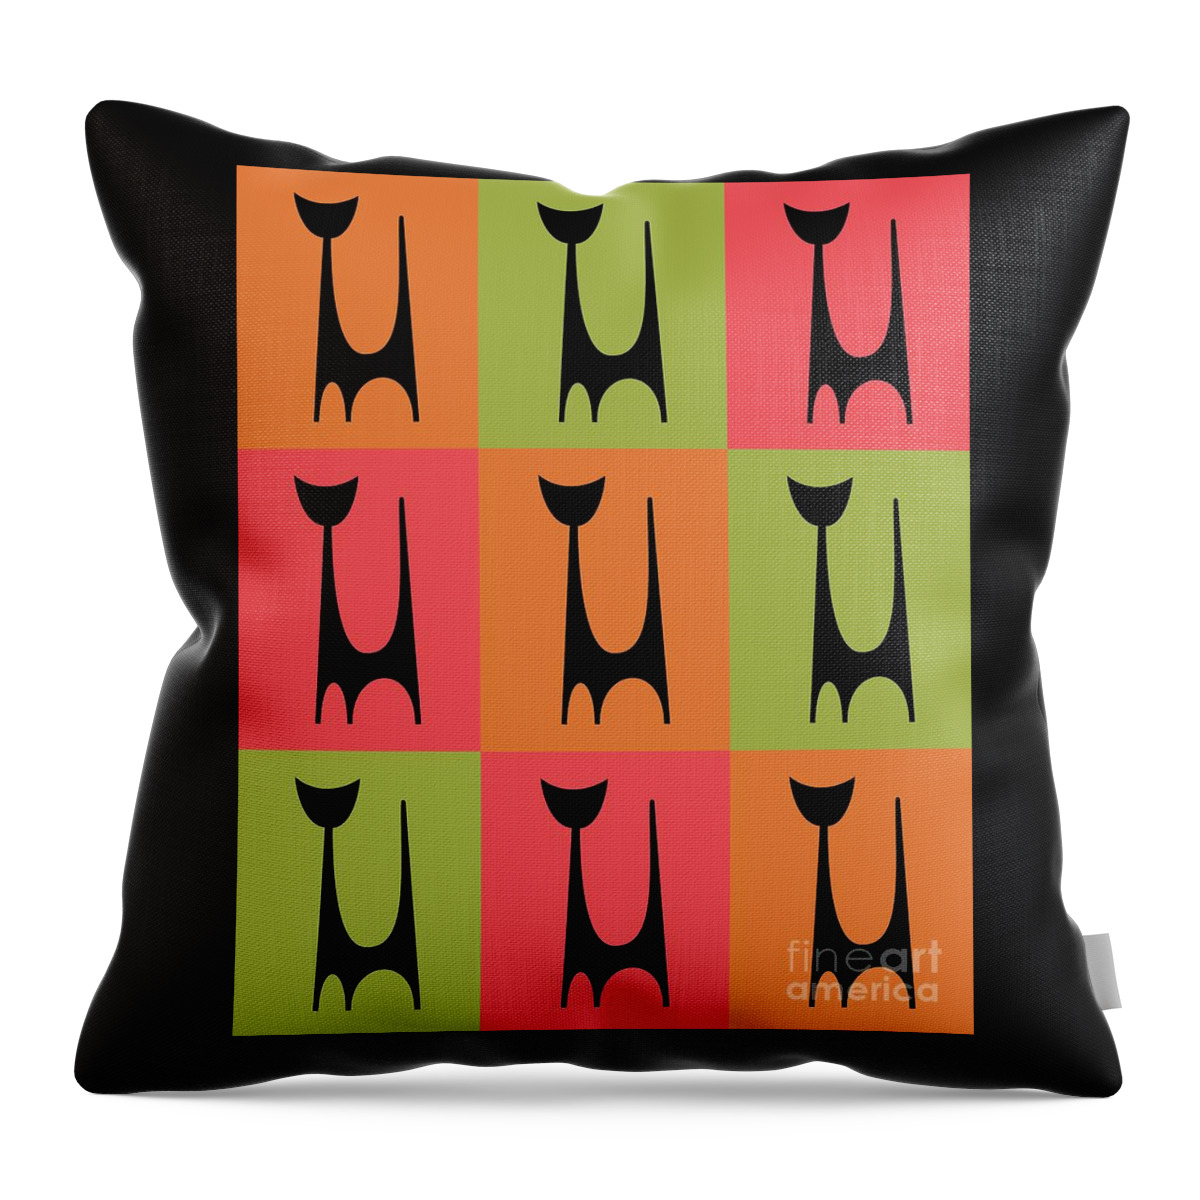 Atomic Cat Throw Pillow featuring the digital art Cat 1 Orange Green Pink by Donna Mibus